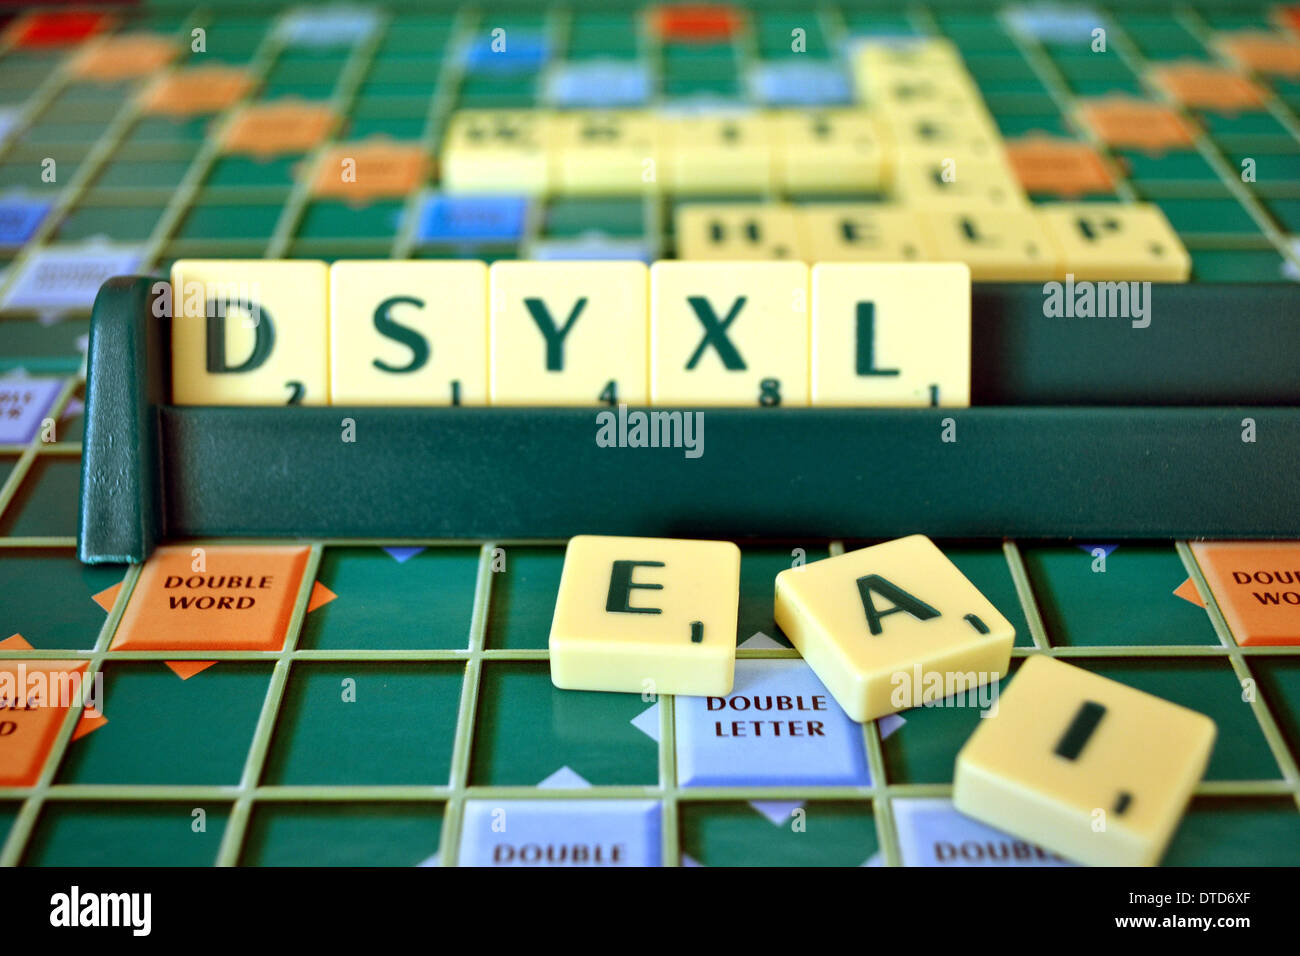 Scrabble board and tiles, mis-spelling the word dyslexia Stock Photo